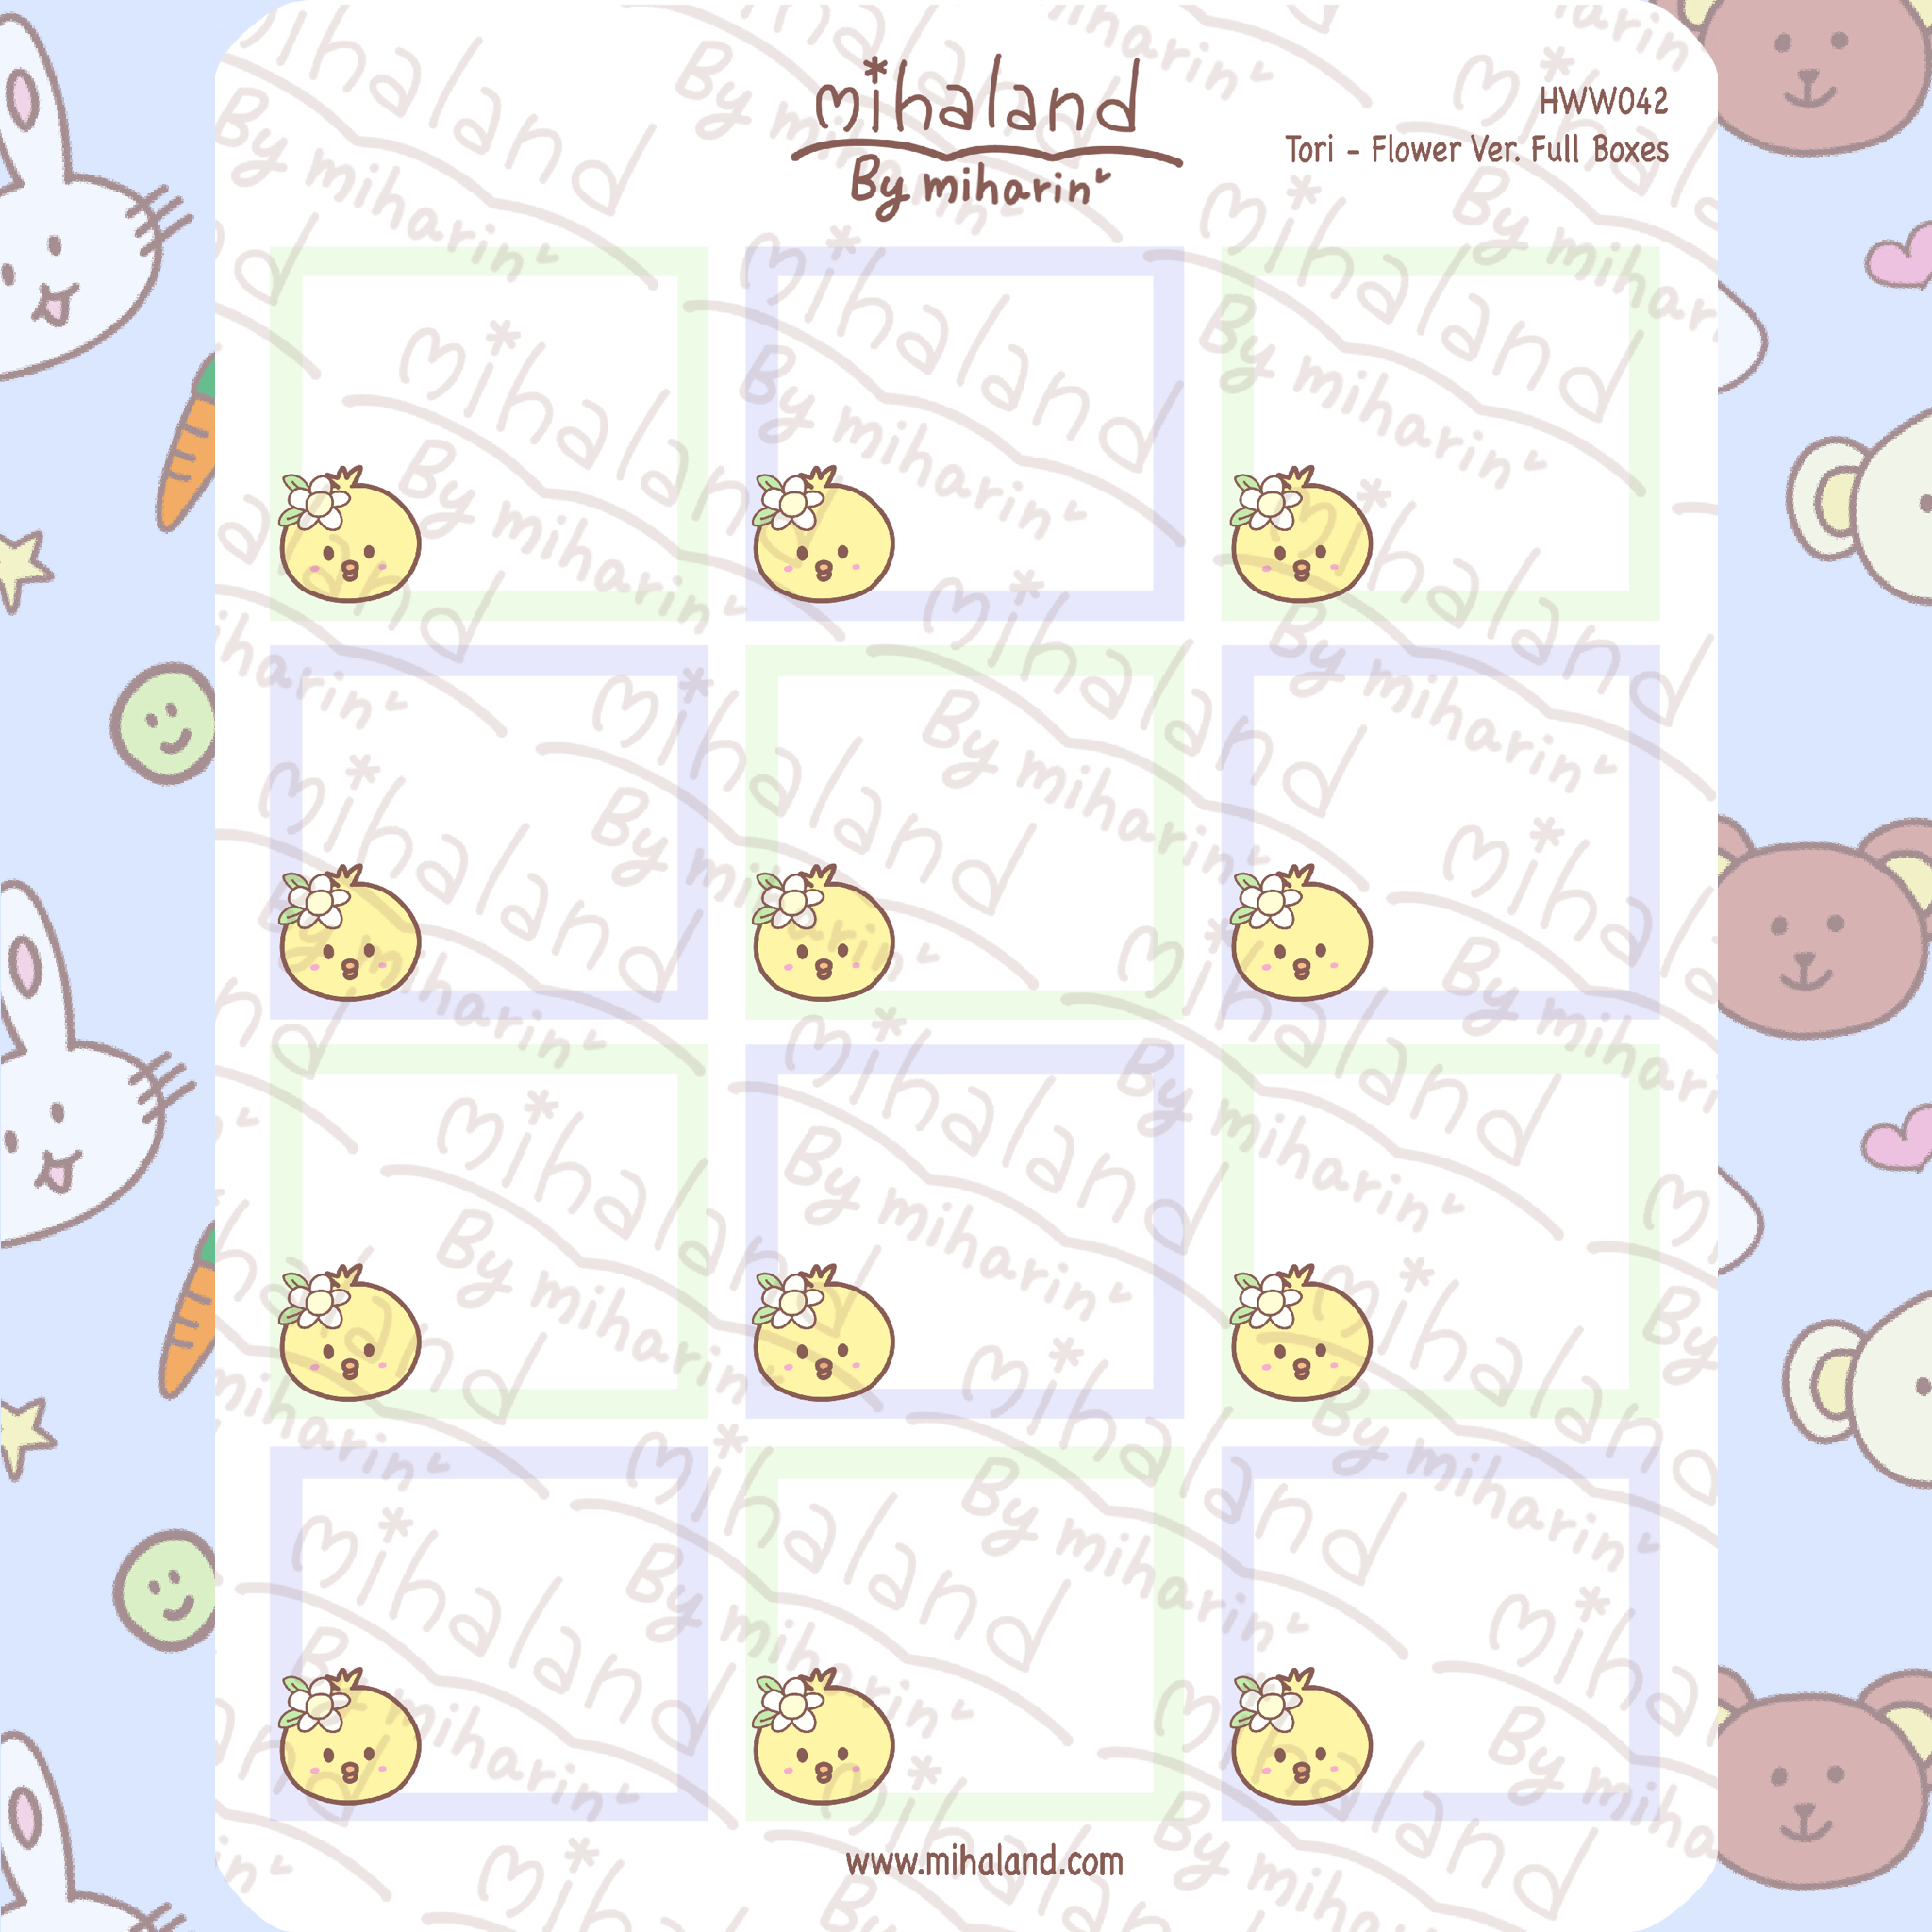 Tori - Flower Ver. Full Boxes for Hobonichi Weeks Planner Stickers (HWW042)